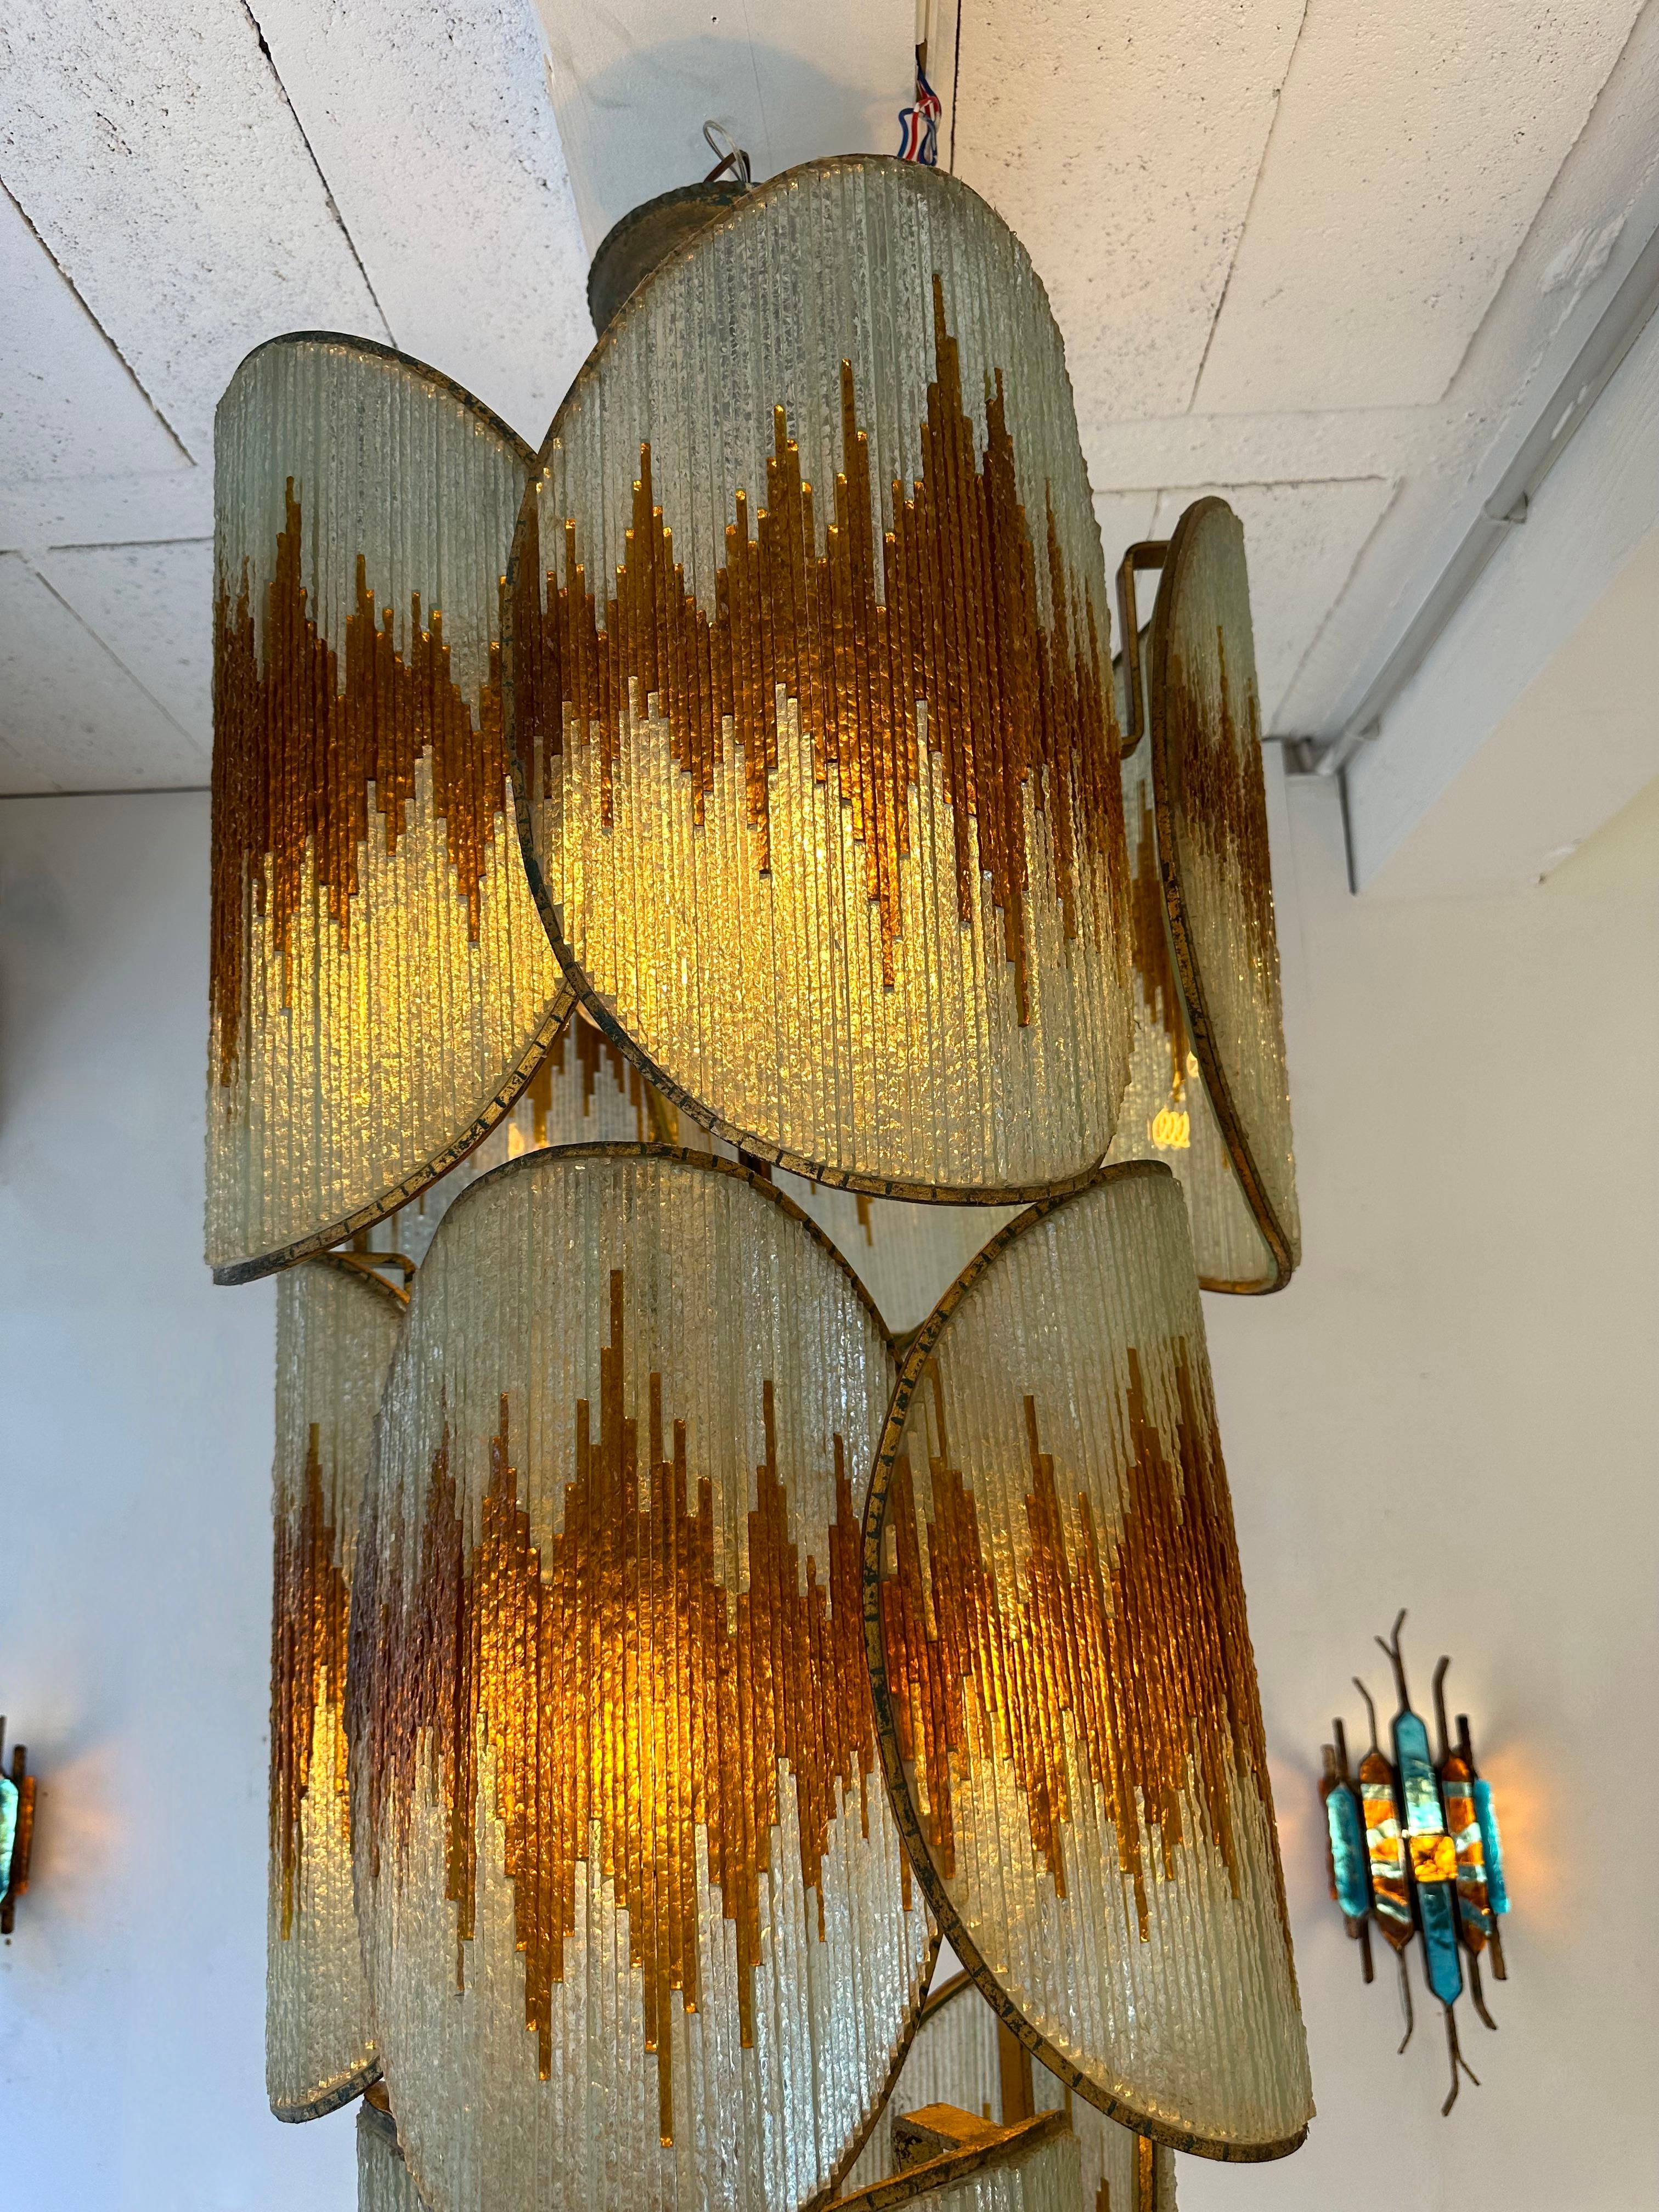 Exceptional, very probably a unique piece. Large Mid-Century Modern chandelier ceiling pendant light lamp in hammered glass and wrought iron, gilding gilt gold patina, by the handmade artisanal italian design manufacture Longobard in Verona in a